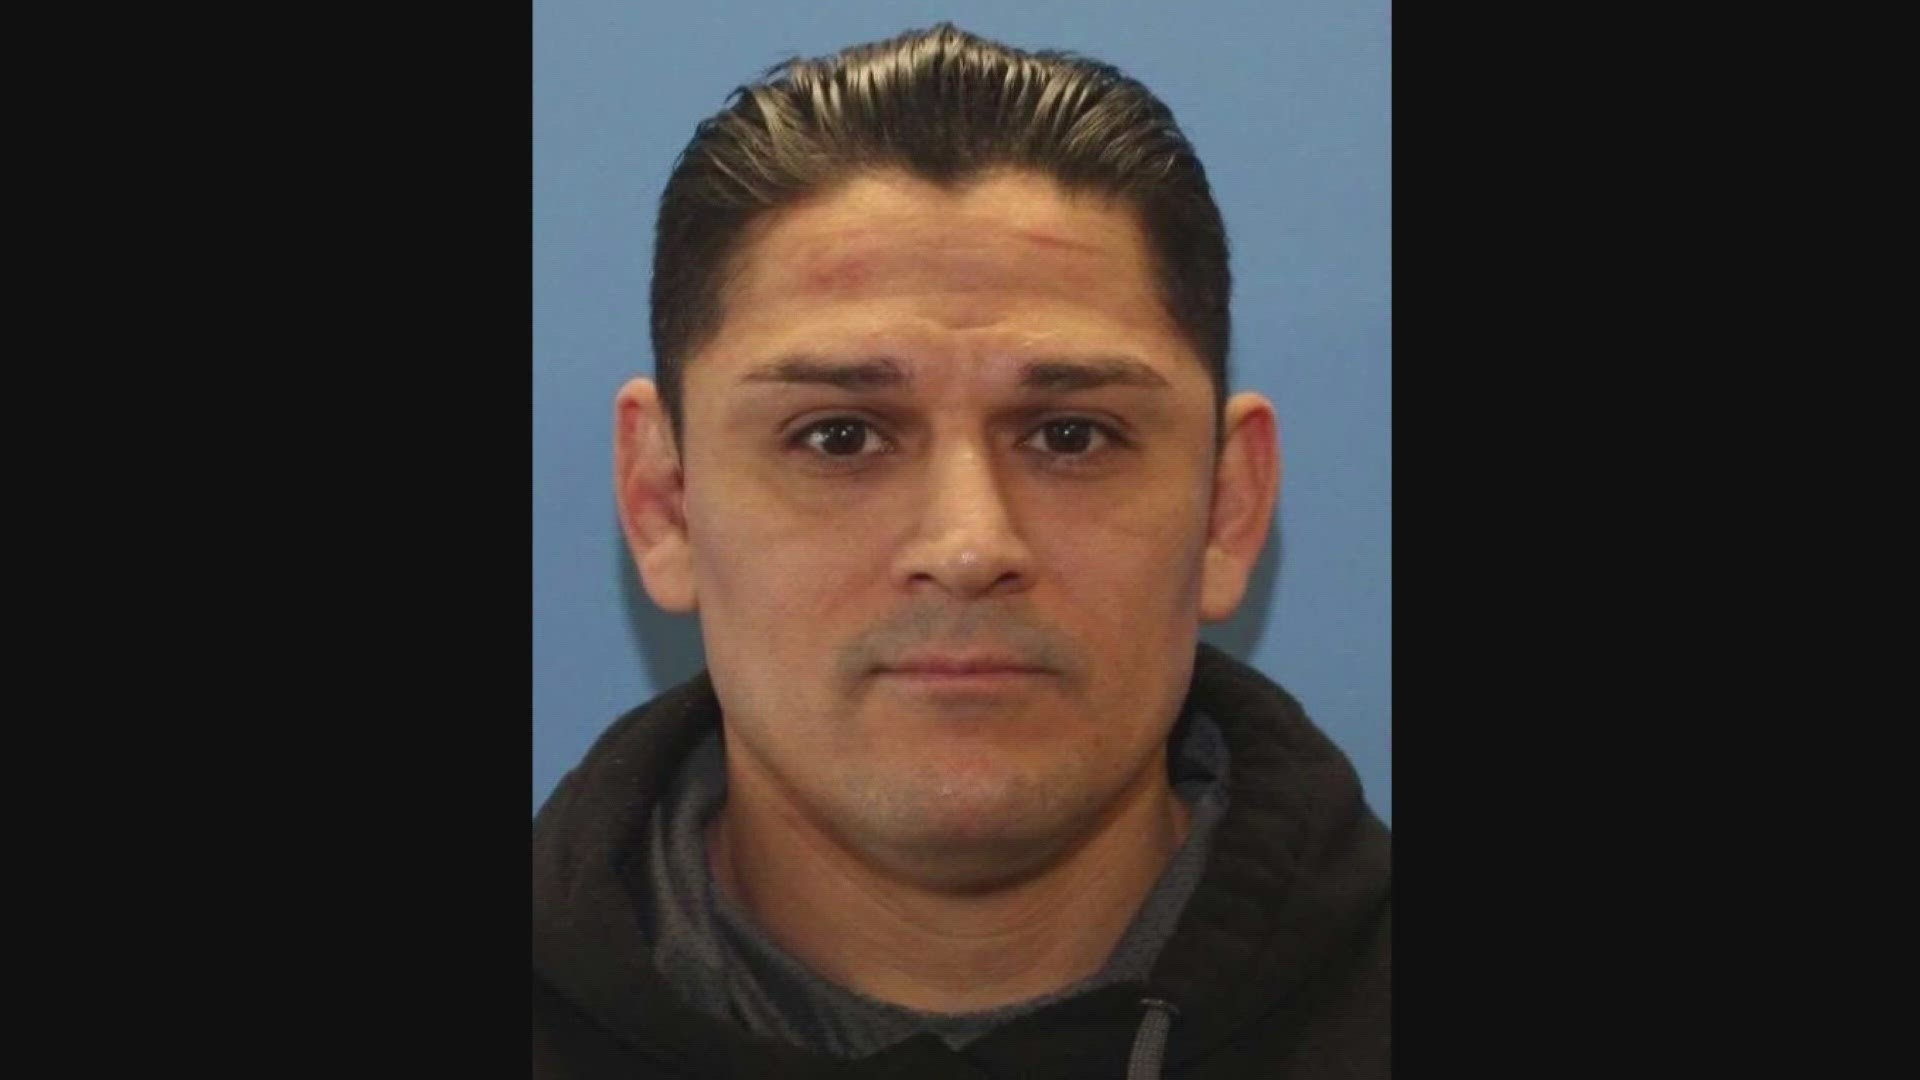 Elias Huizar, 39, is believed to have killed two people and abducted his 1-year-old child.